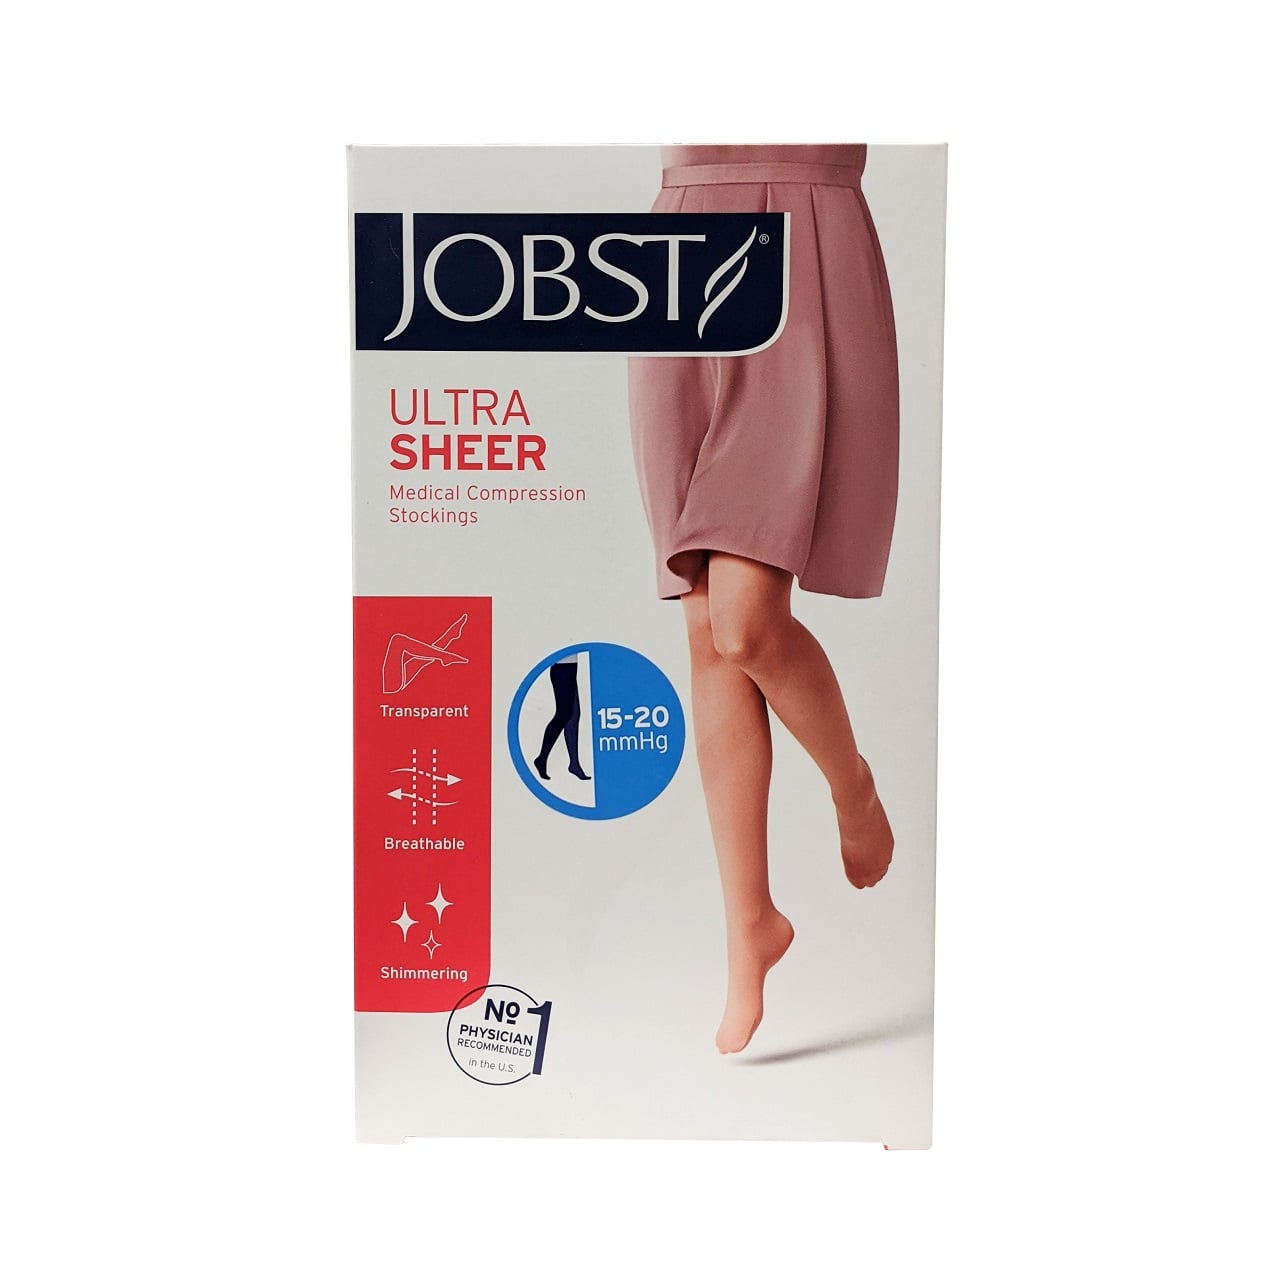 Product label for Jobst UltraSheer Compression Stockings 20-30 mmHg - Pantyhose / Closed Toe / Black (Medium)